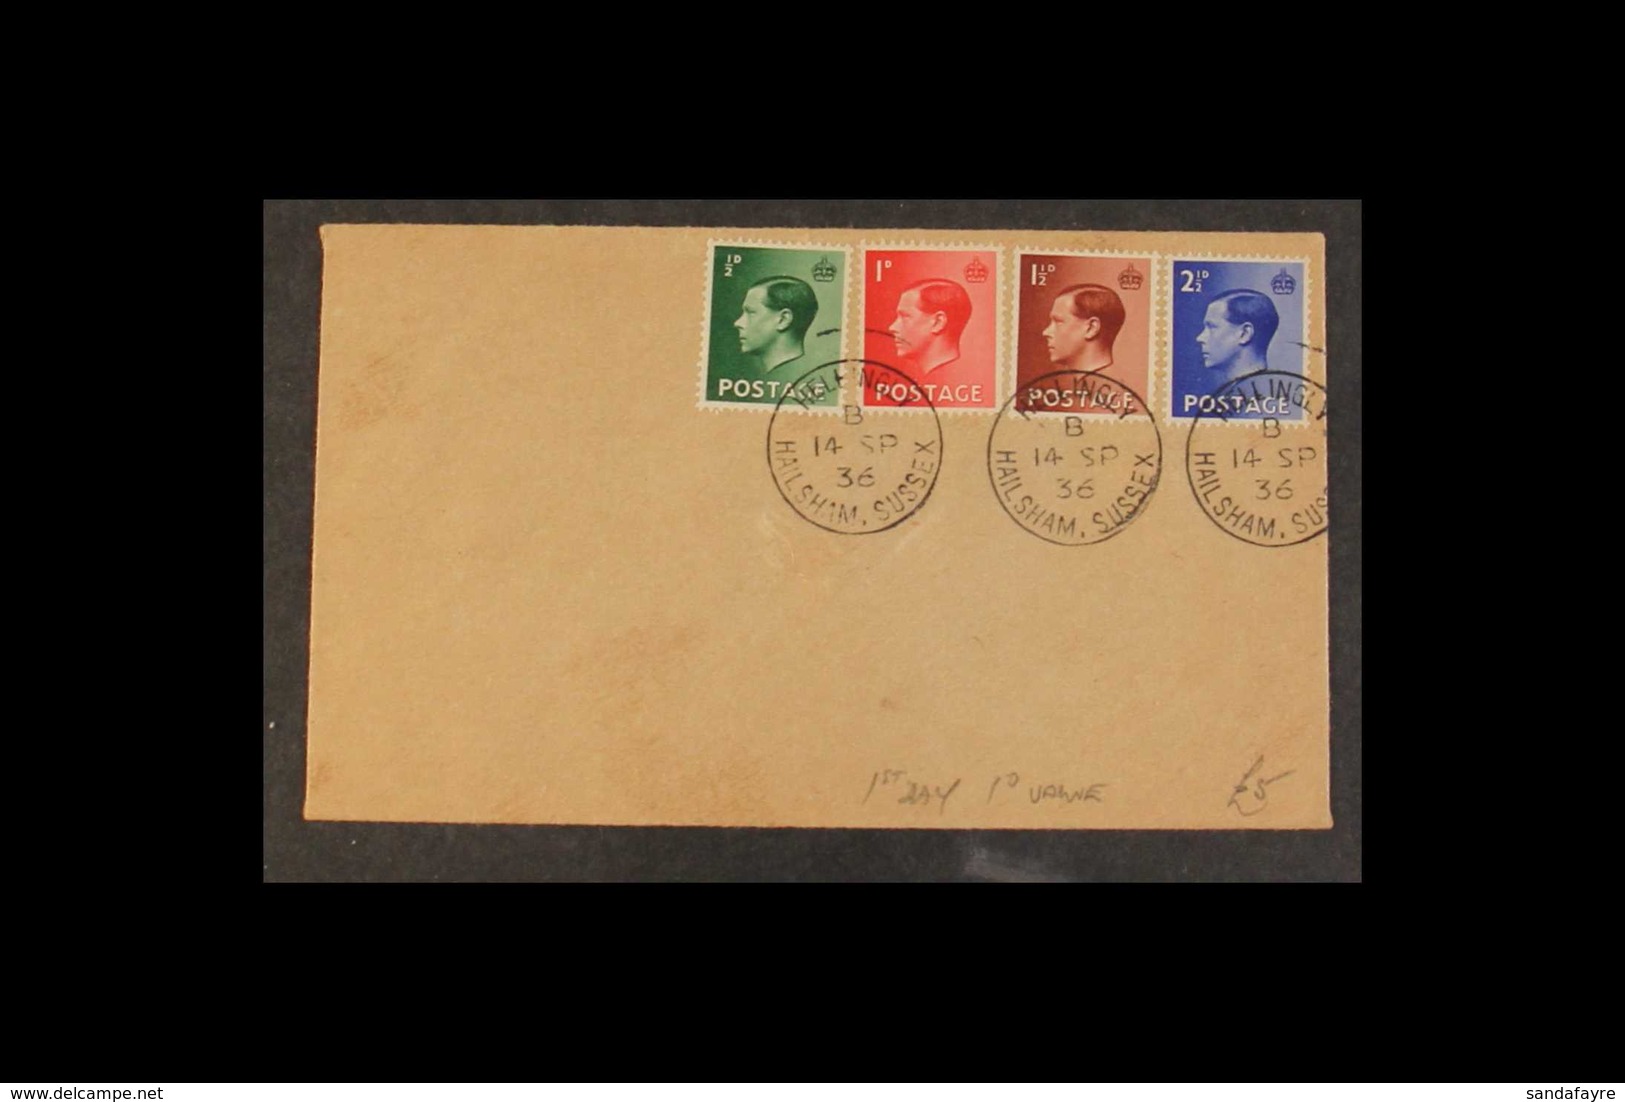 1936-1941 COVERS & CARDS COLLECTION Housed In A Small Album, Includes Various Illustrated & Plain First Day Covers Incl  - Unclassified